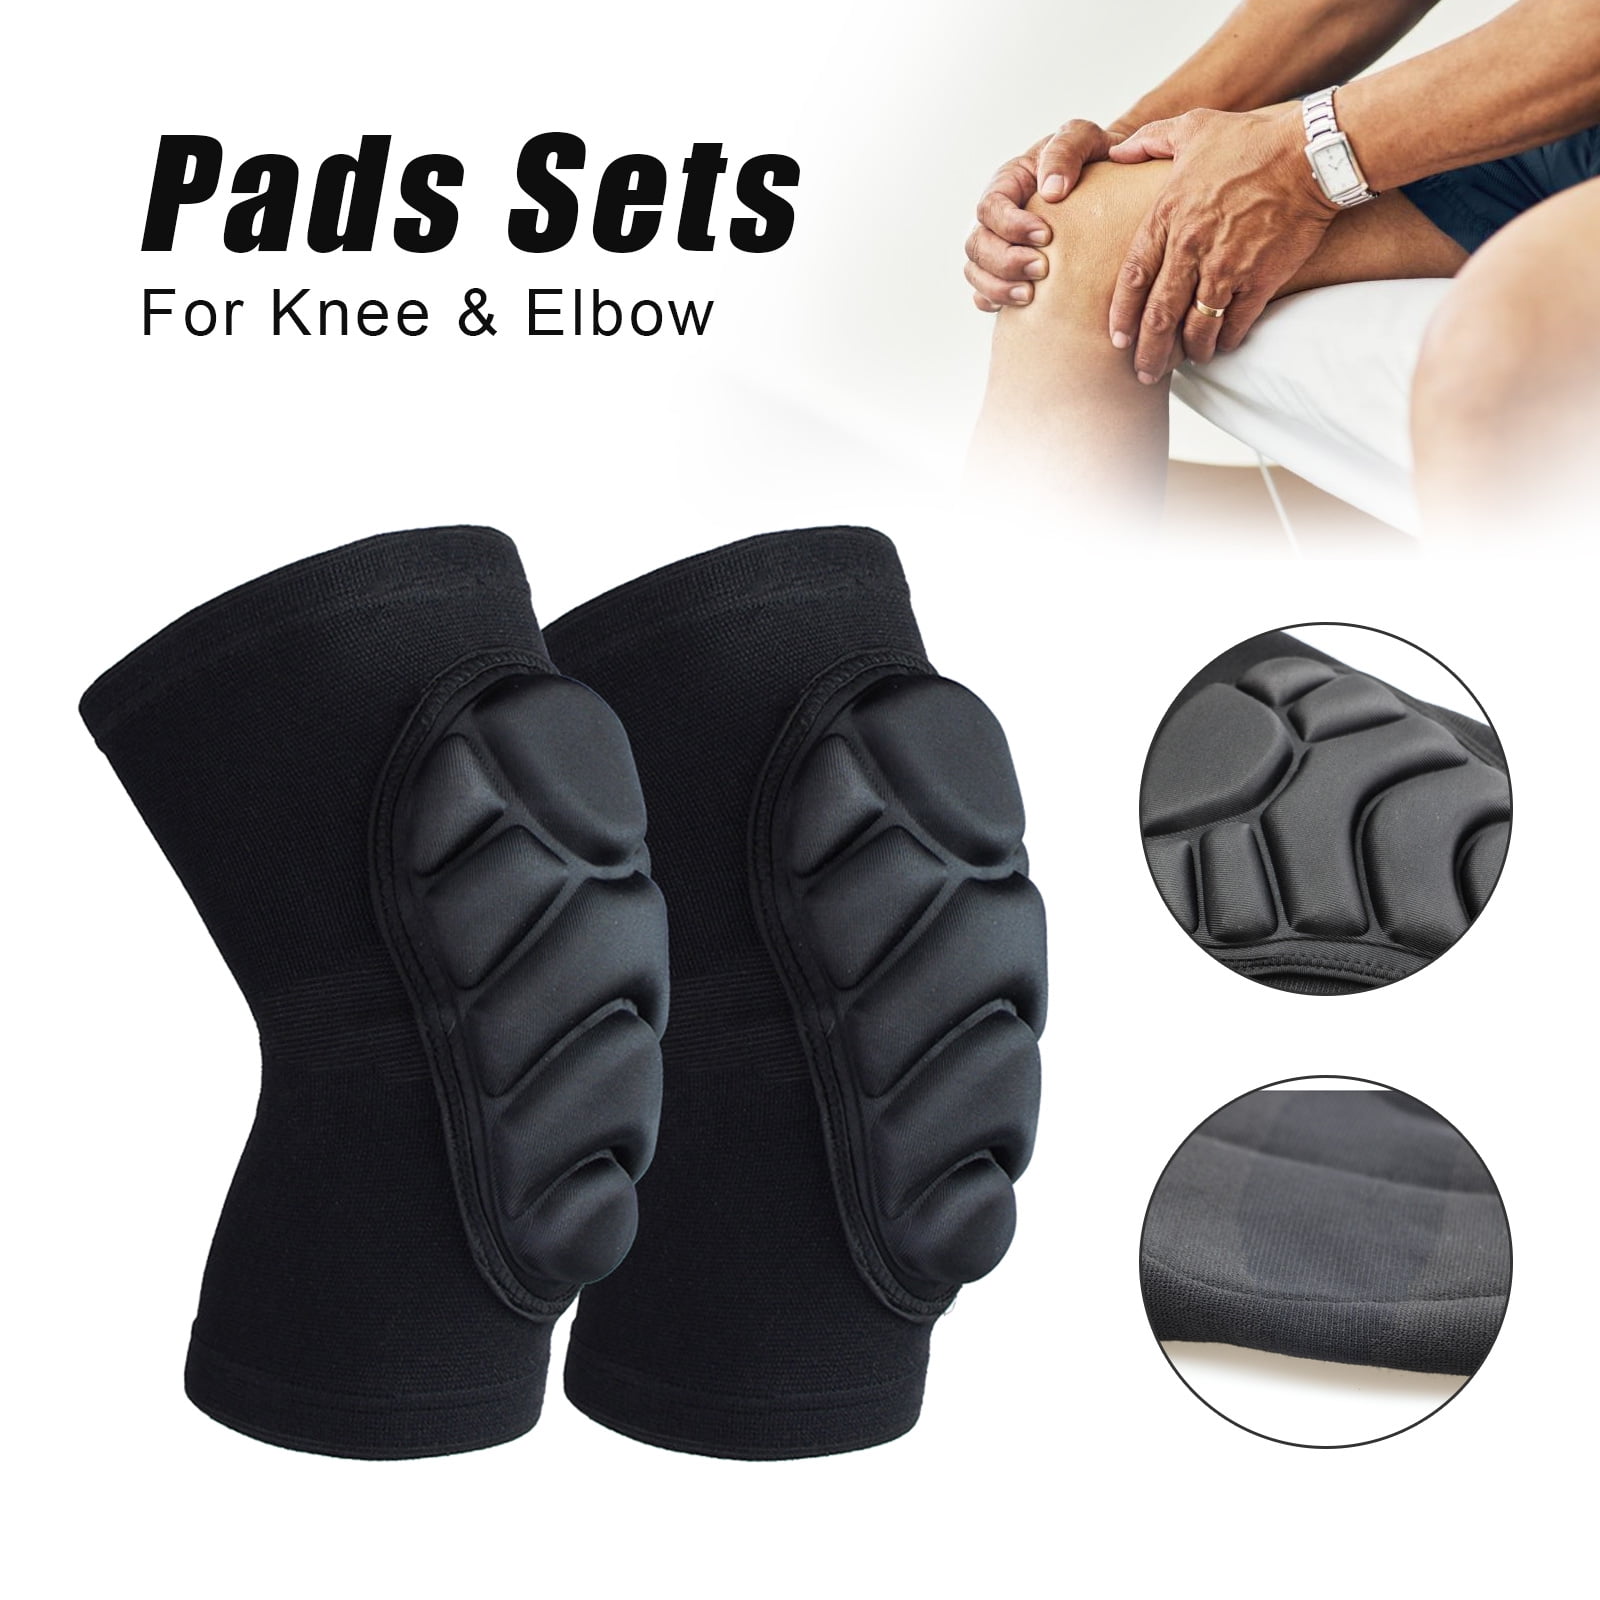 Protective Knee Pads for Men Women Work,Volleyball Knee Pad Thick Anti-Slip 